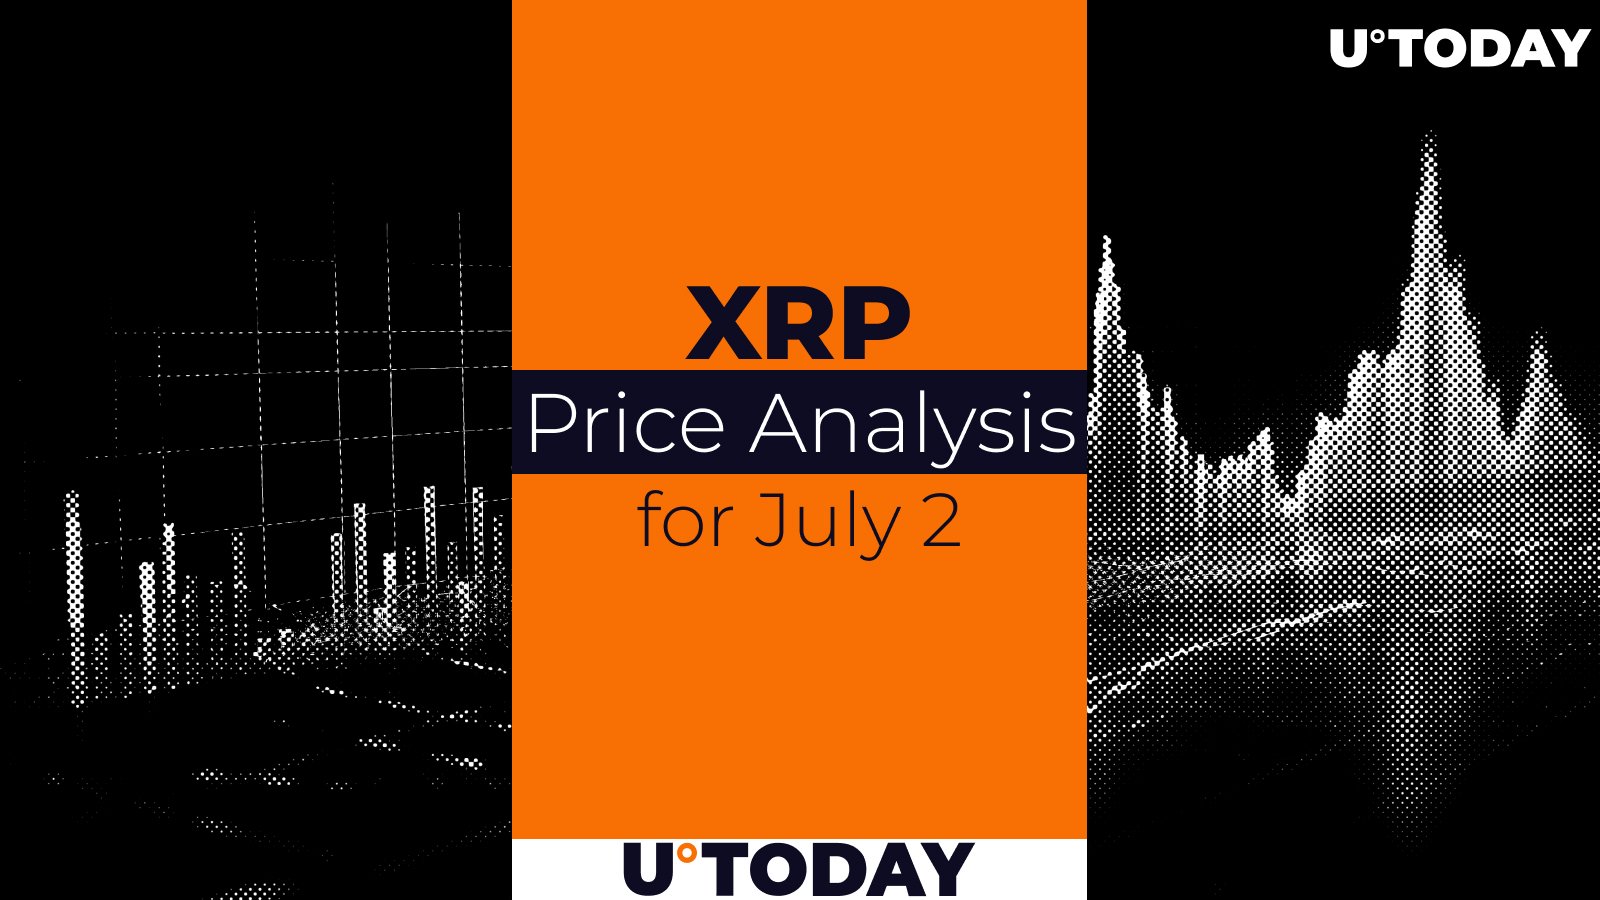 XRP Price Prediction for July 2